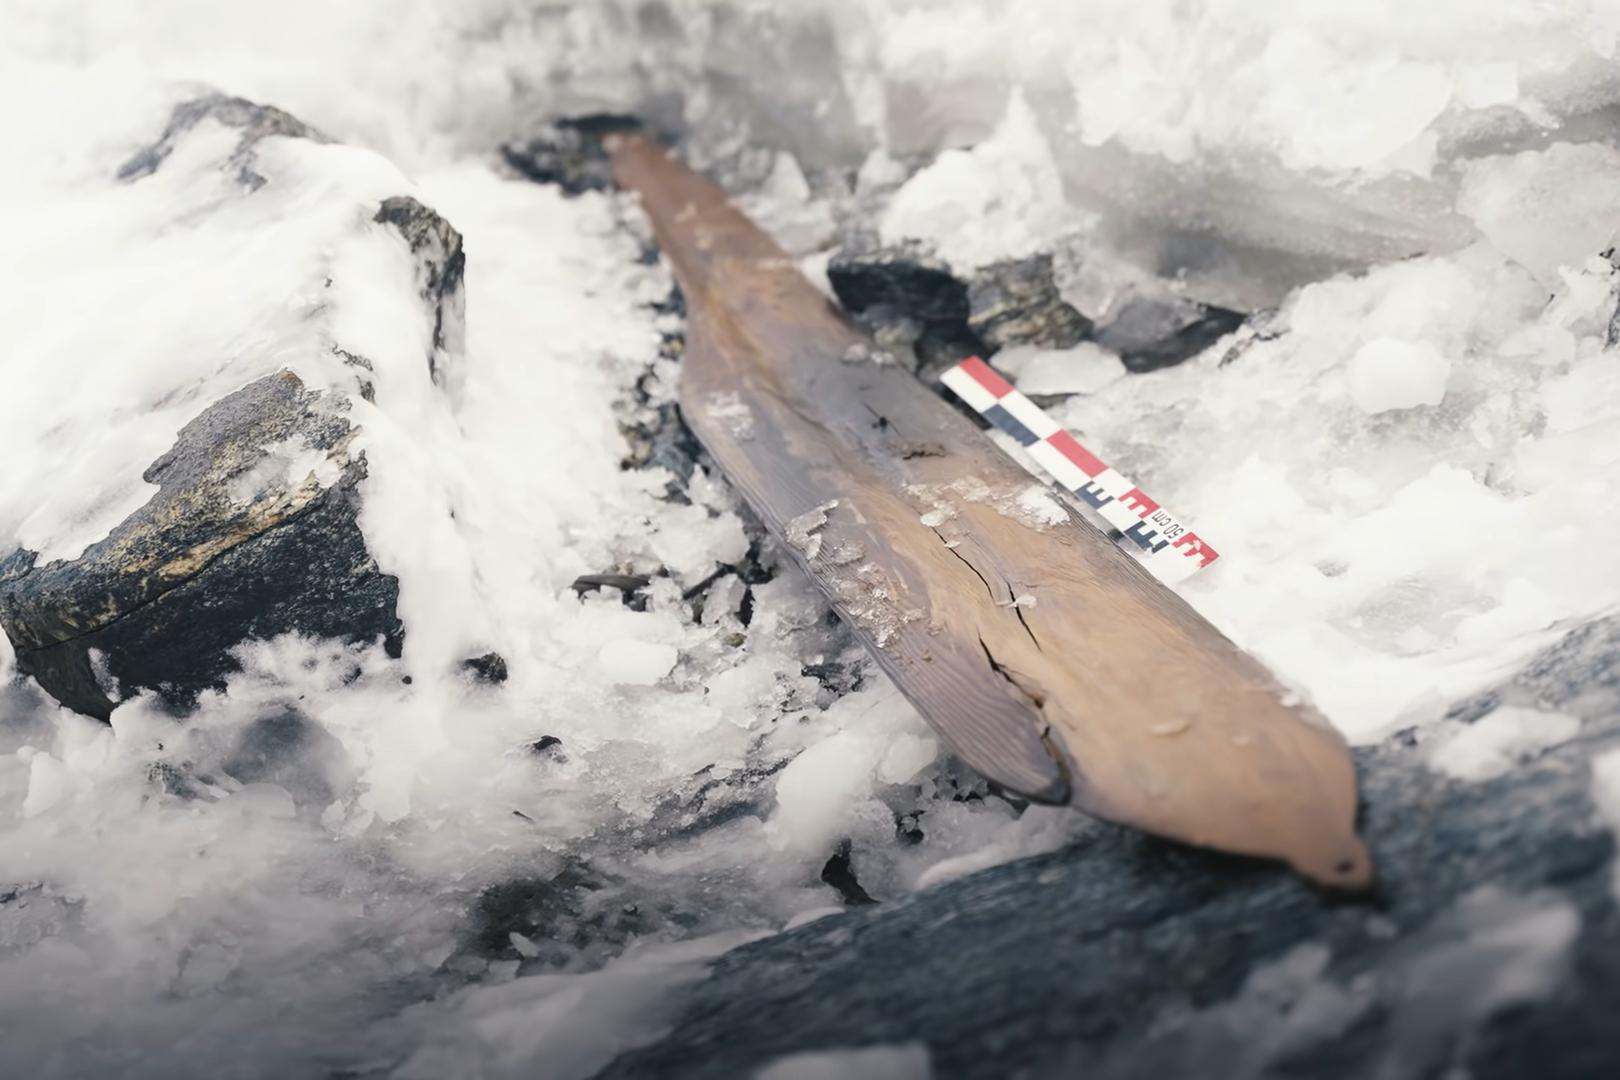 The previously missing ancient ski will join its match, discovered back in 2014